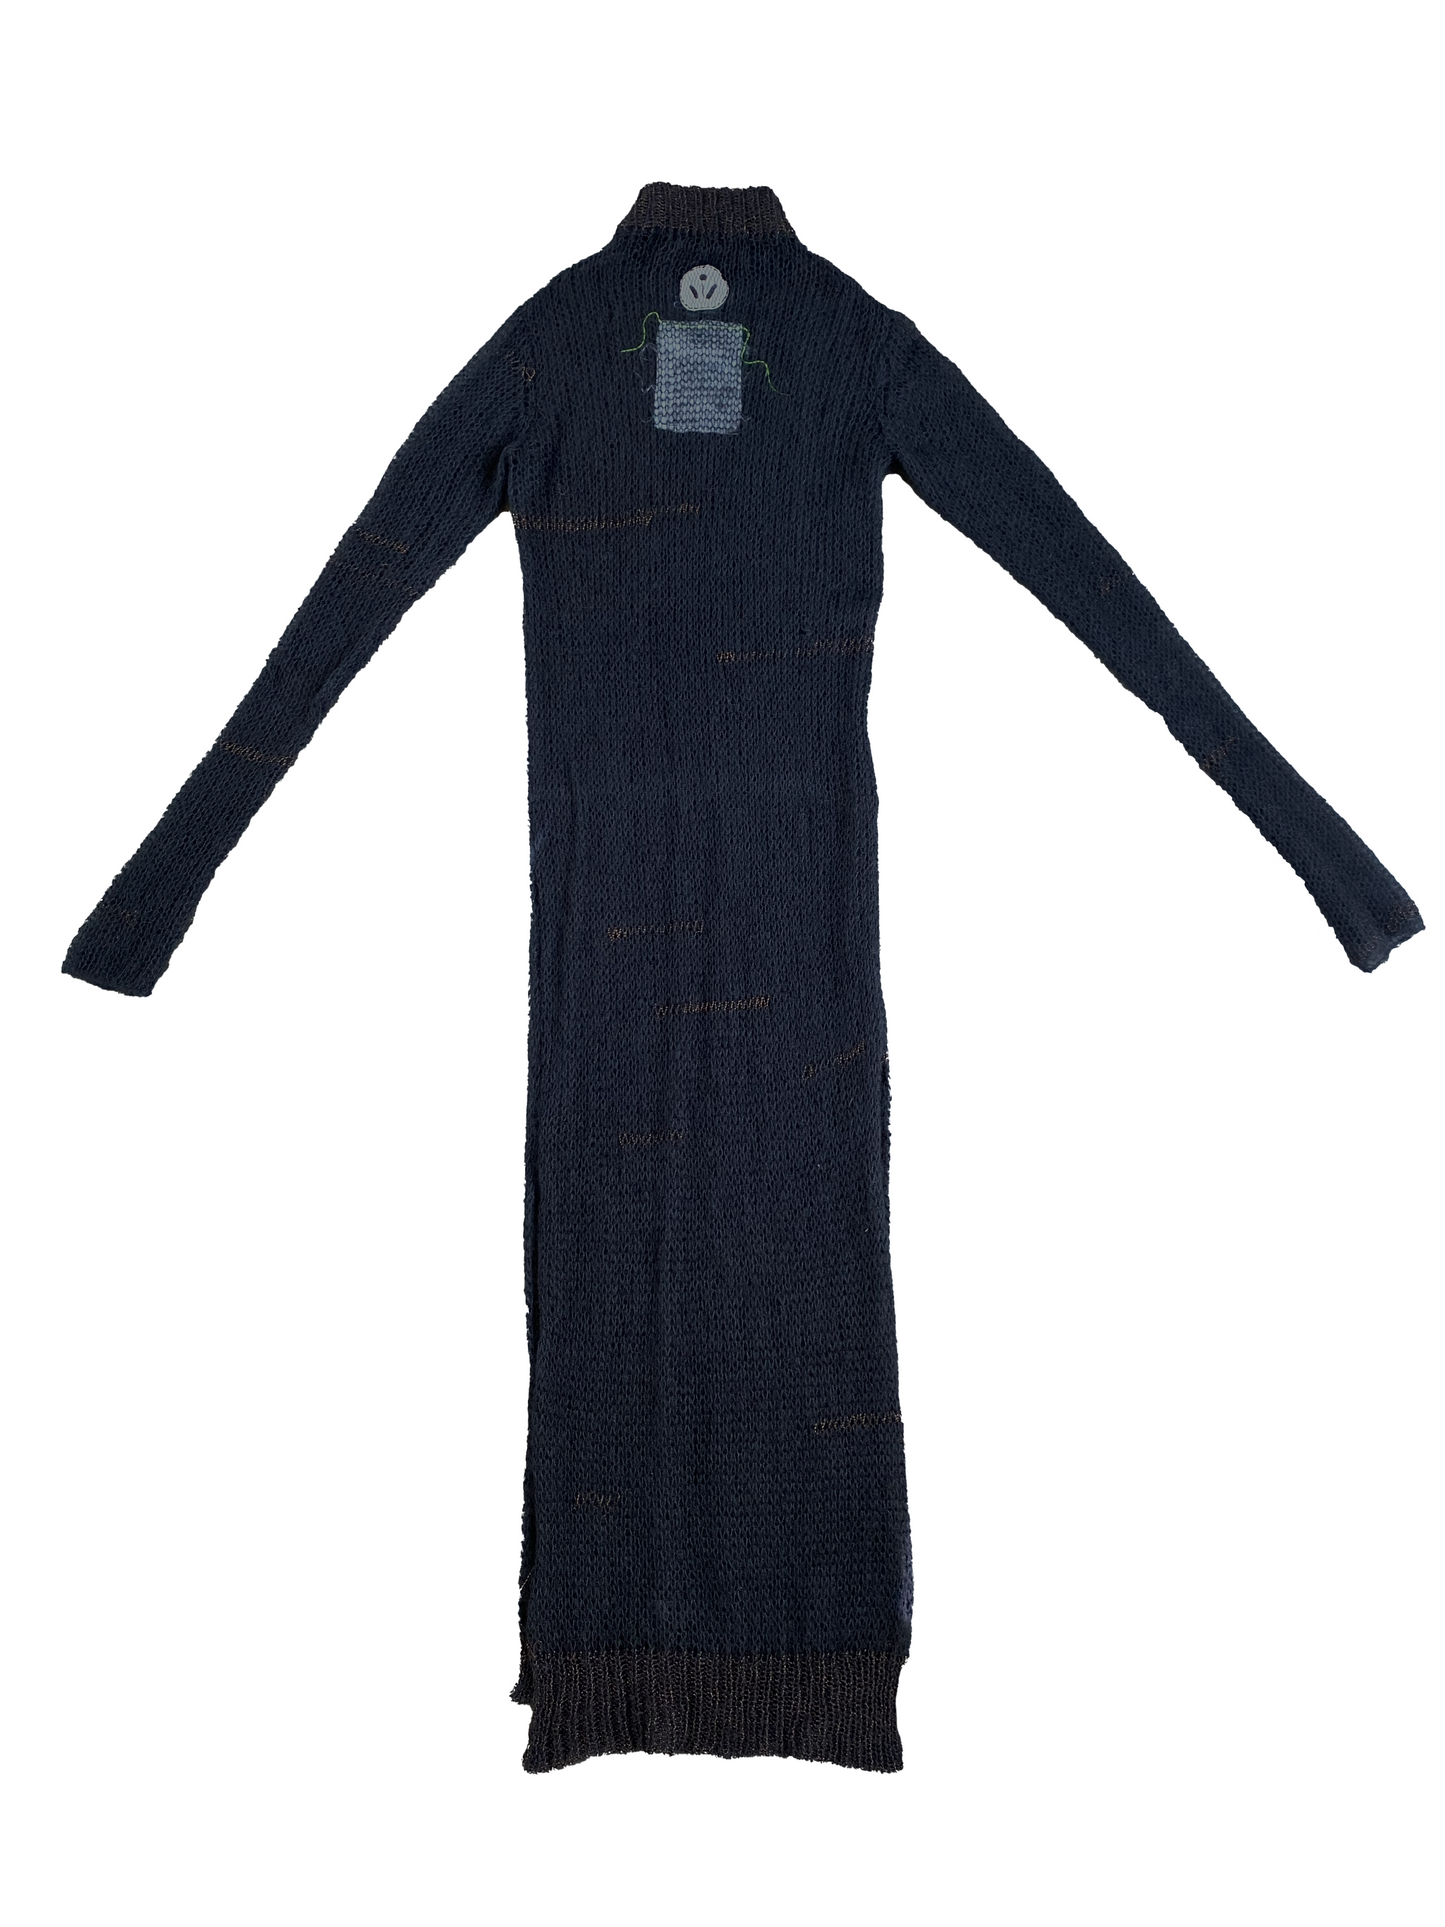 Black & Bronze Artisanal Silk Mohair Knitted Dress With Hand Embroidered Logo